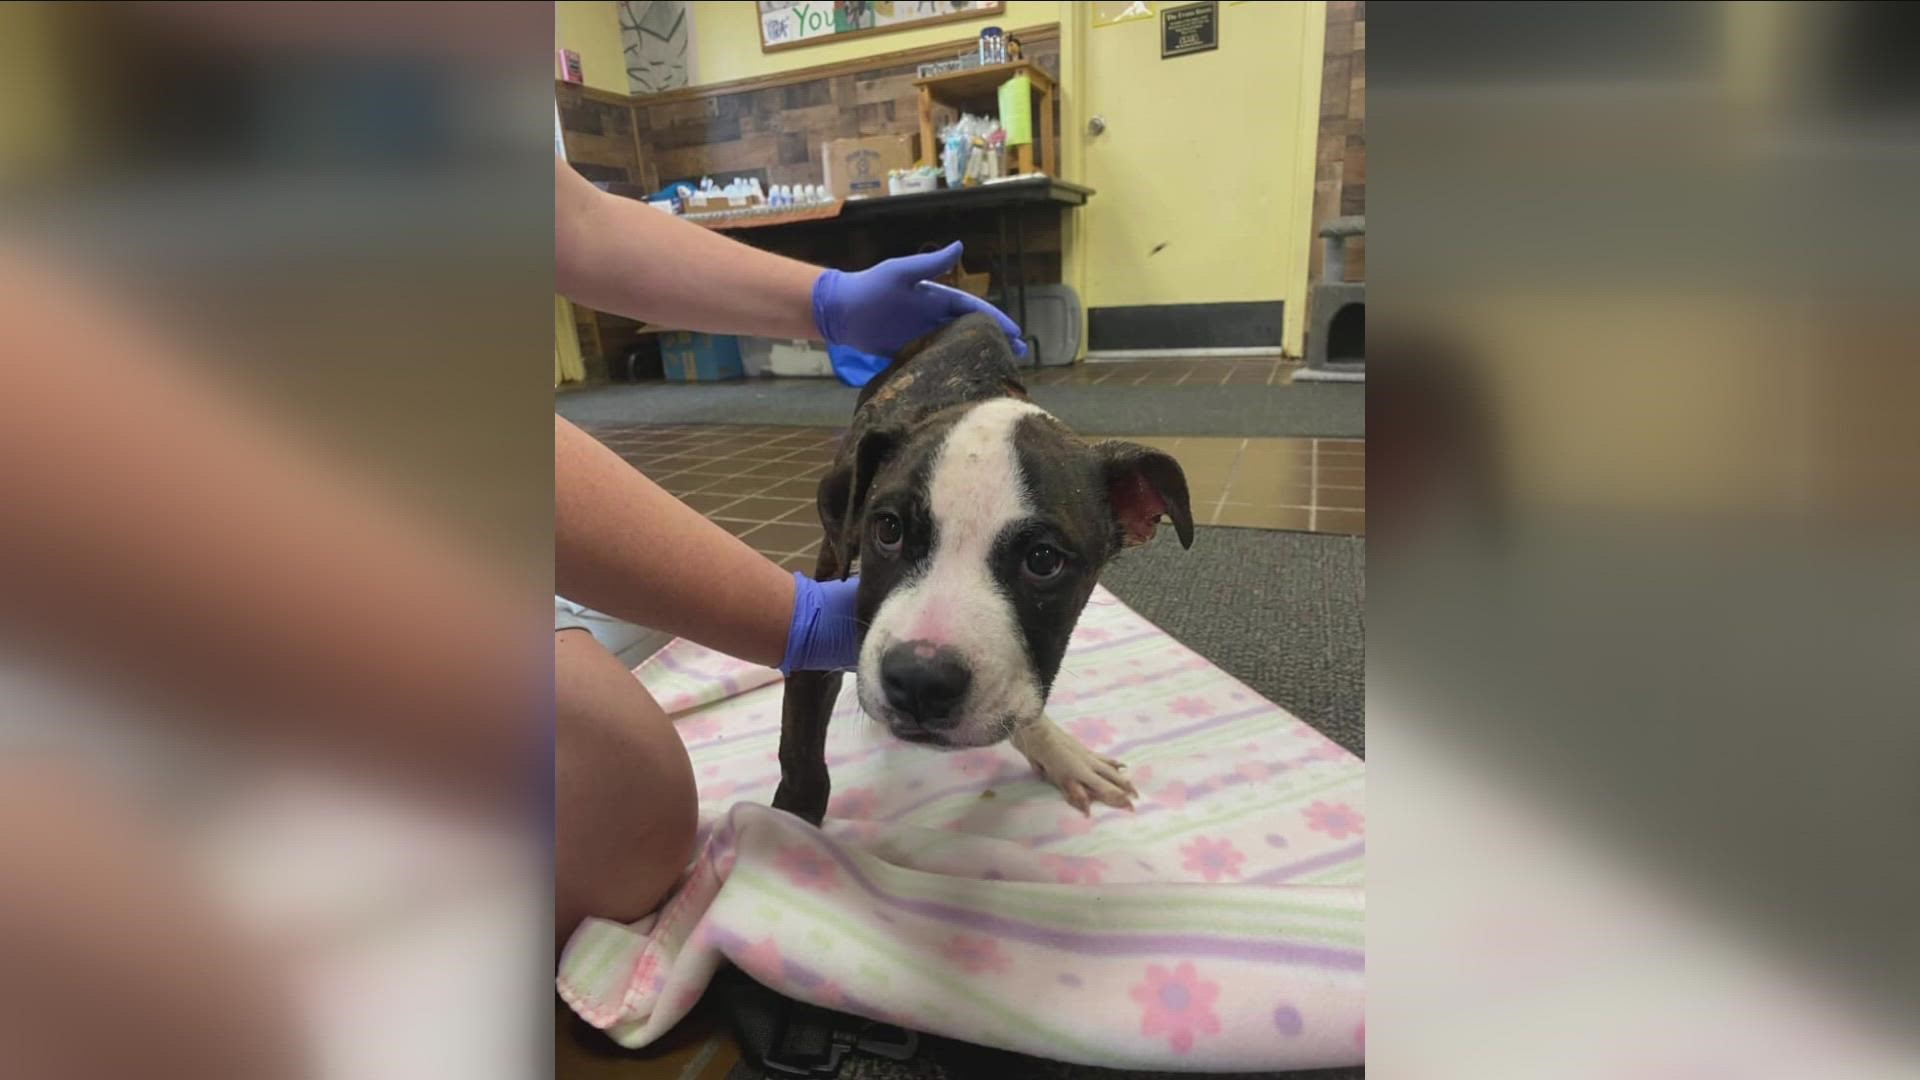 THE VETERINARIAN FOUND MORE SEVERE INJURIES.. like BROKEN BONES AND KIDNEY FAILURE. ULTIMATELY THAT vet RECOMMENDED THE puppy BE EUTHANIZED